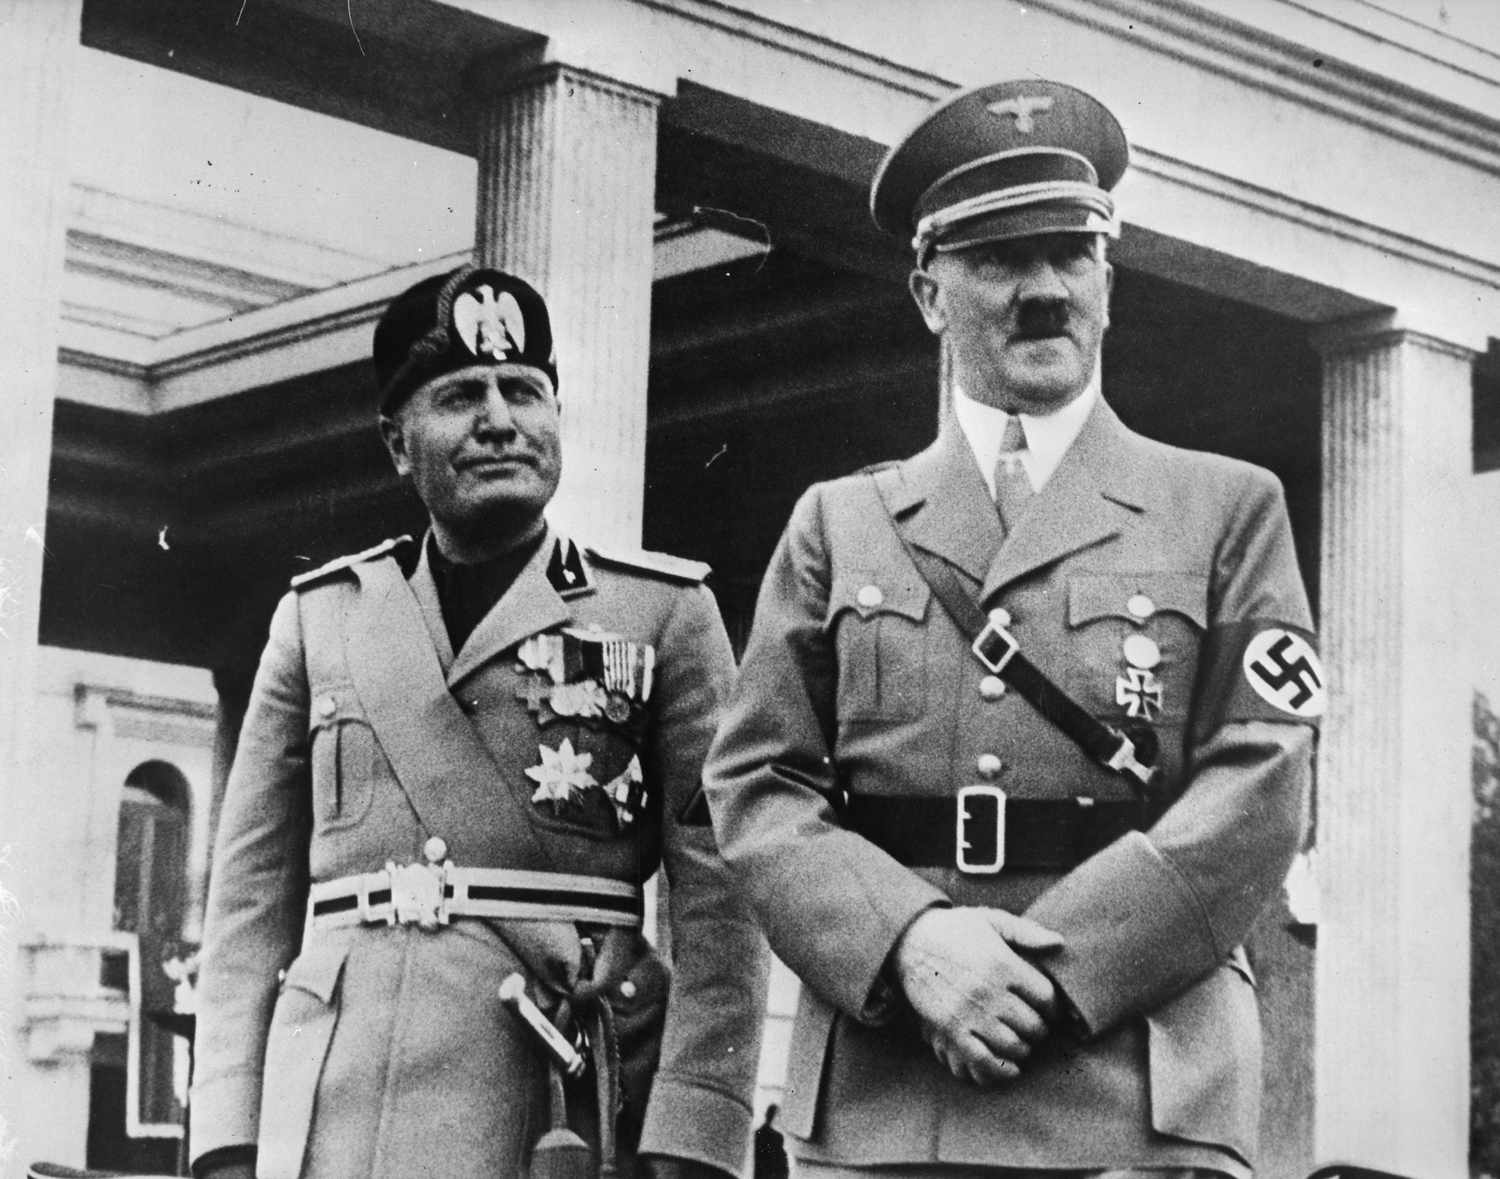 Benito Mussolini and Adolf Hitler in Munich, Germany September 1937.